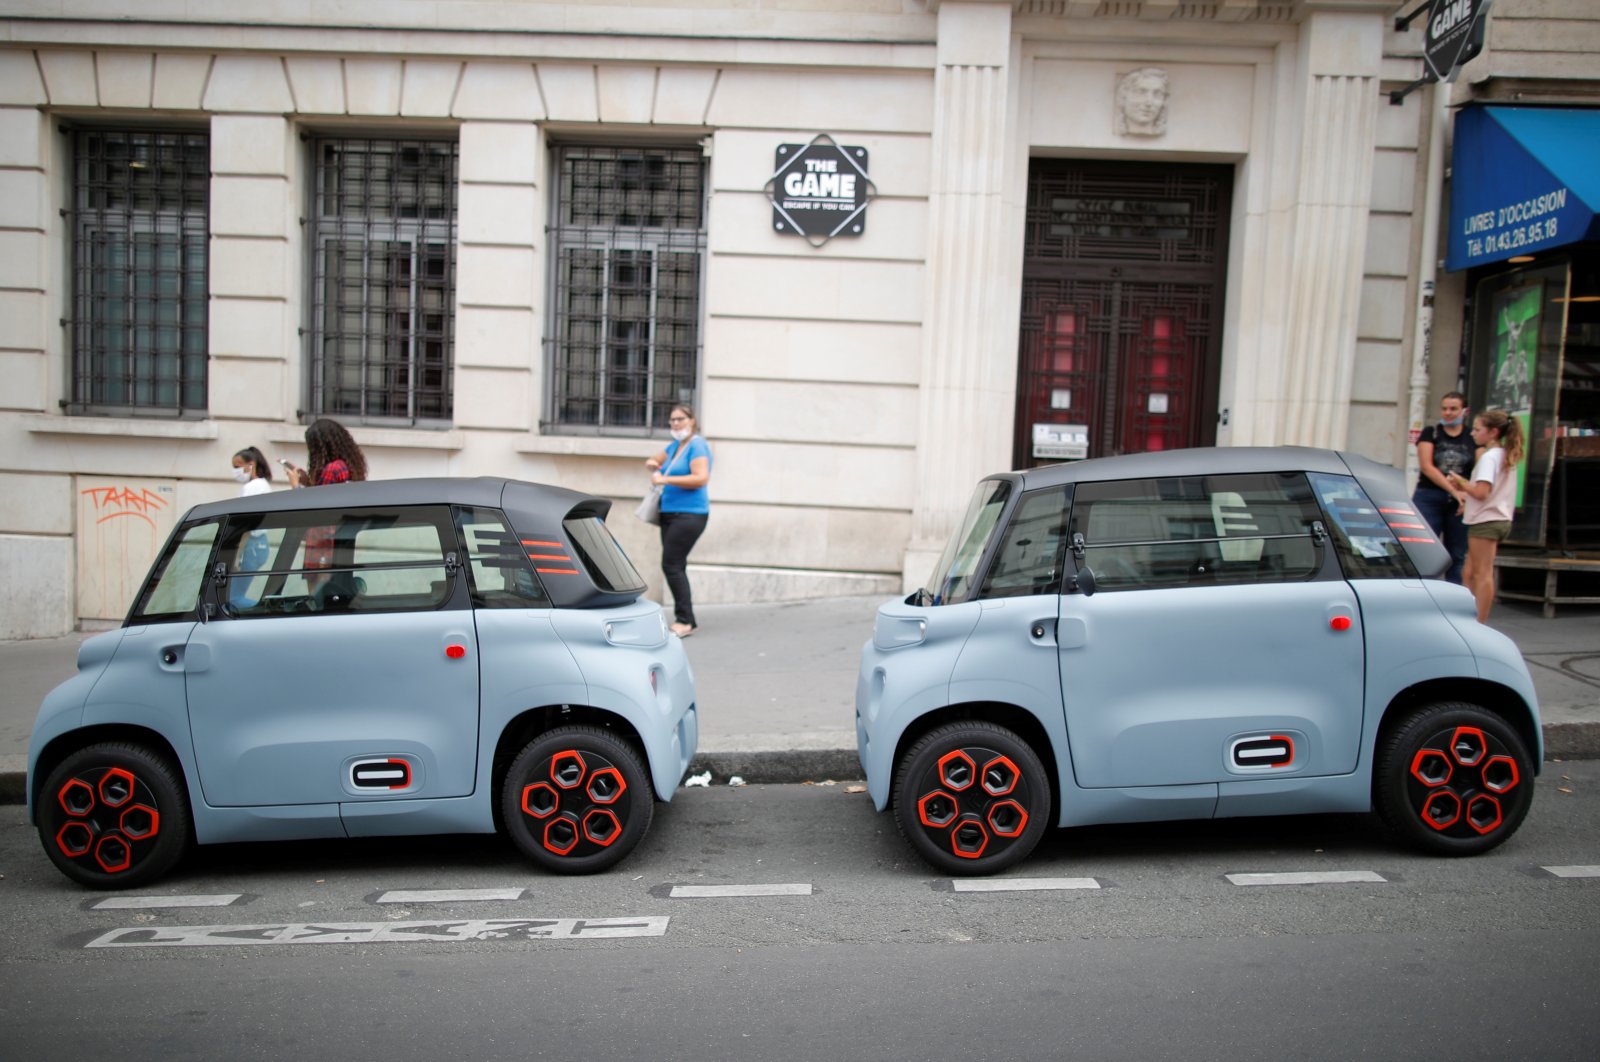 PSA's Citroen new electric city cars AMI are seen during a media presentation in Paris, France, Aug. 25, 2020. (Reuters Photo)